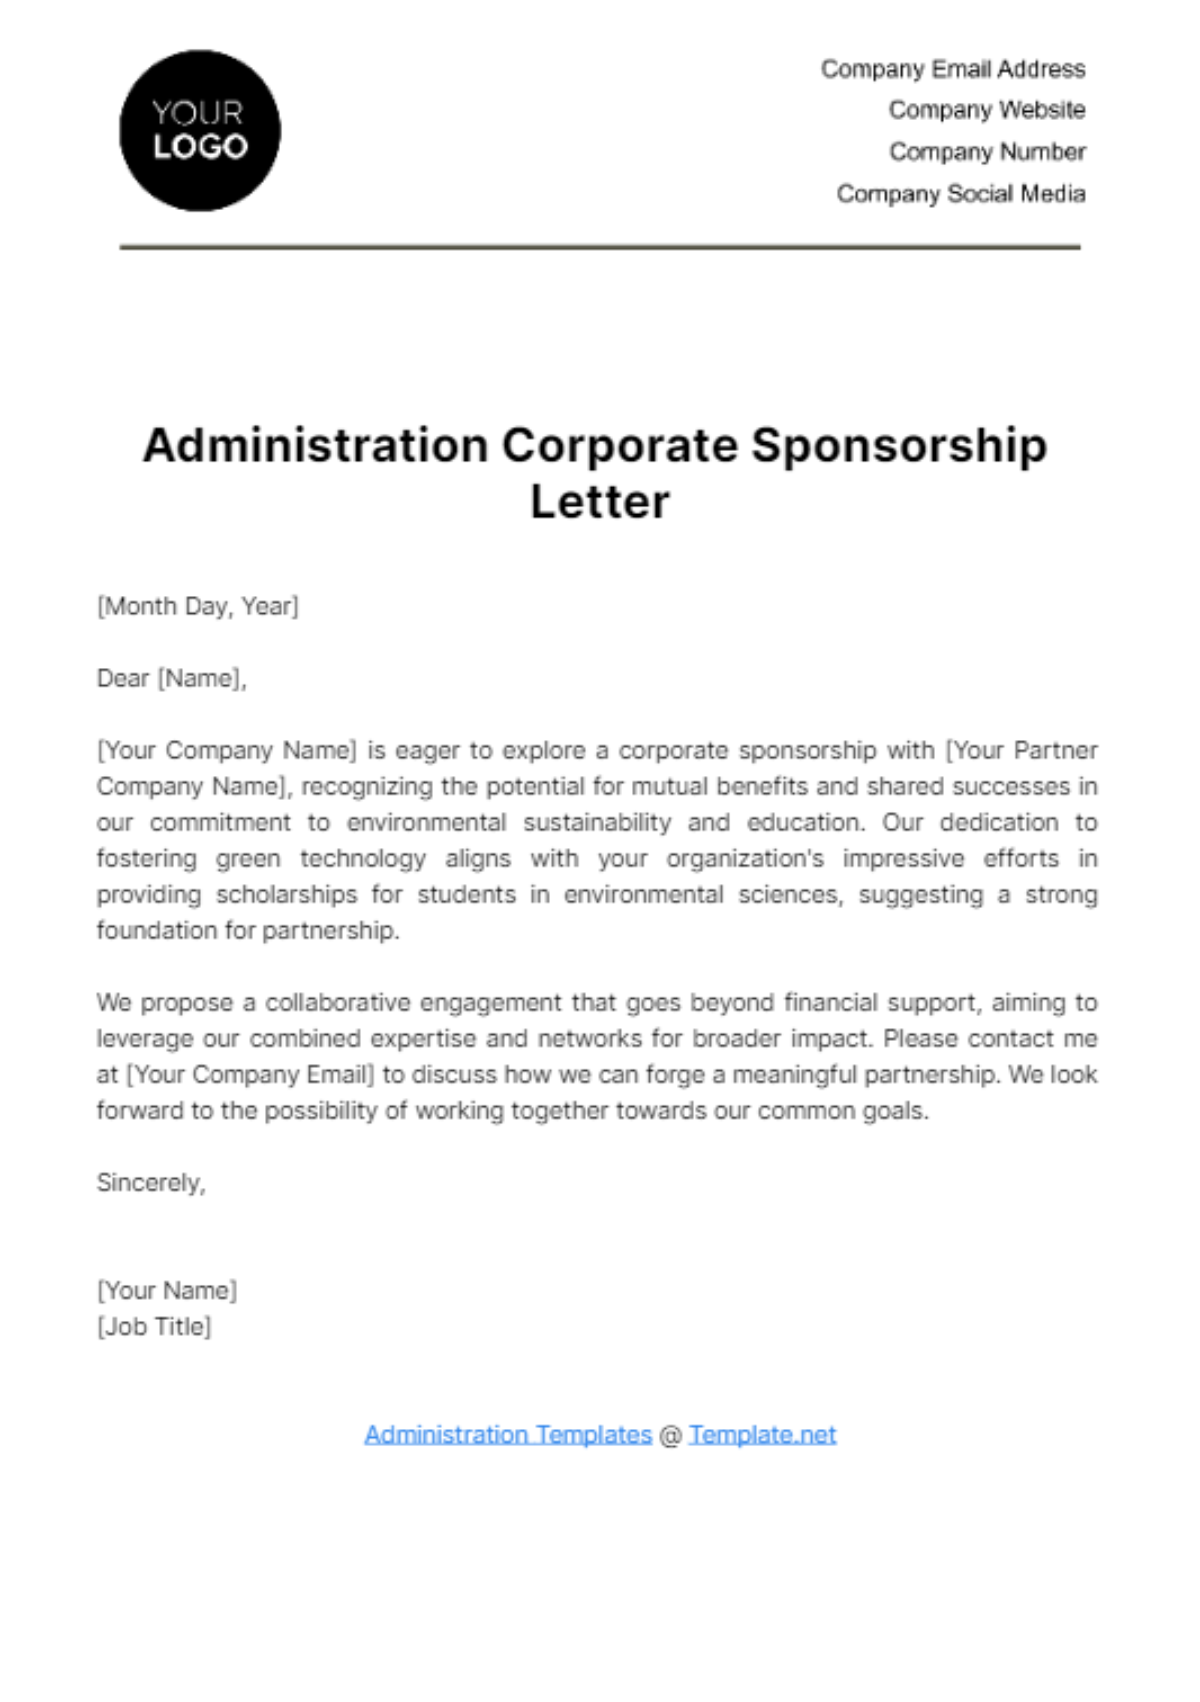 Administration Corporate Sponsorship Letter Template